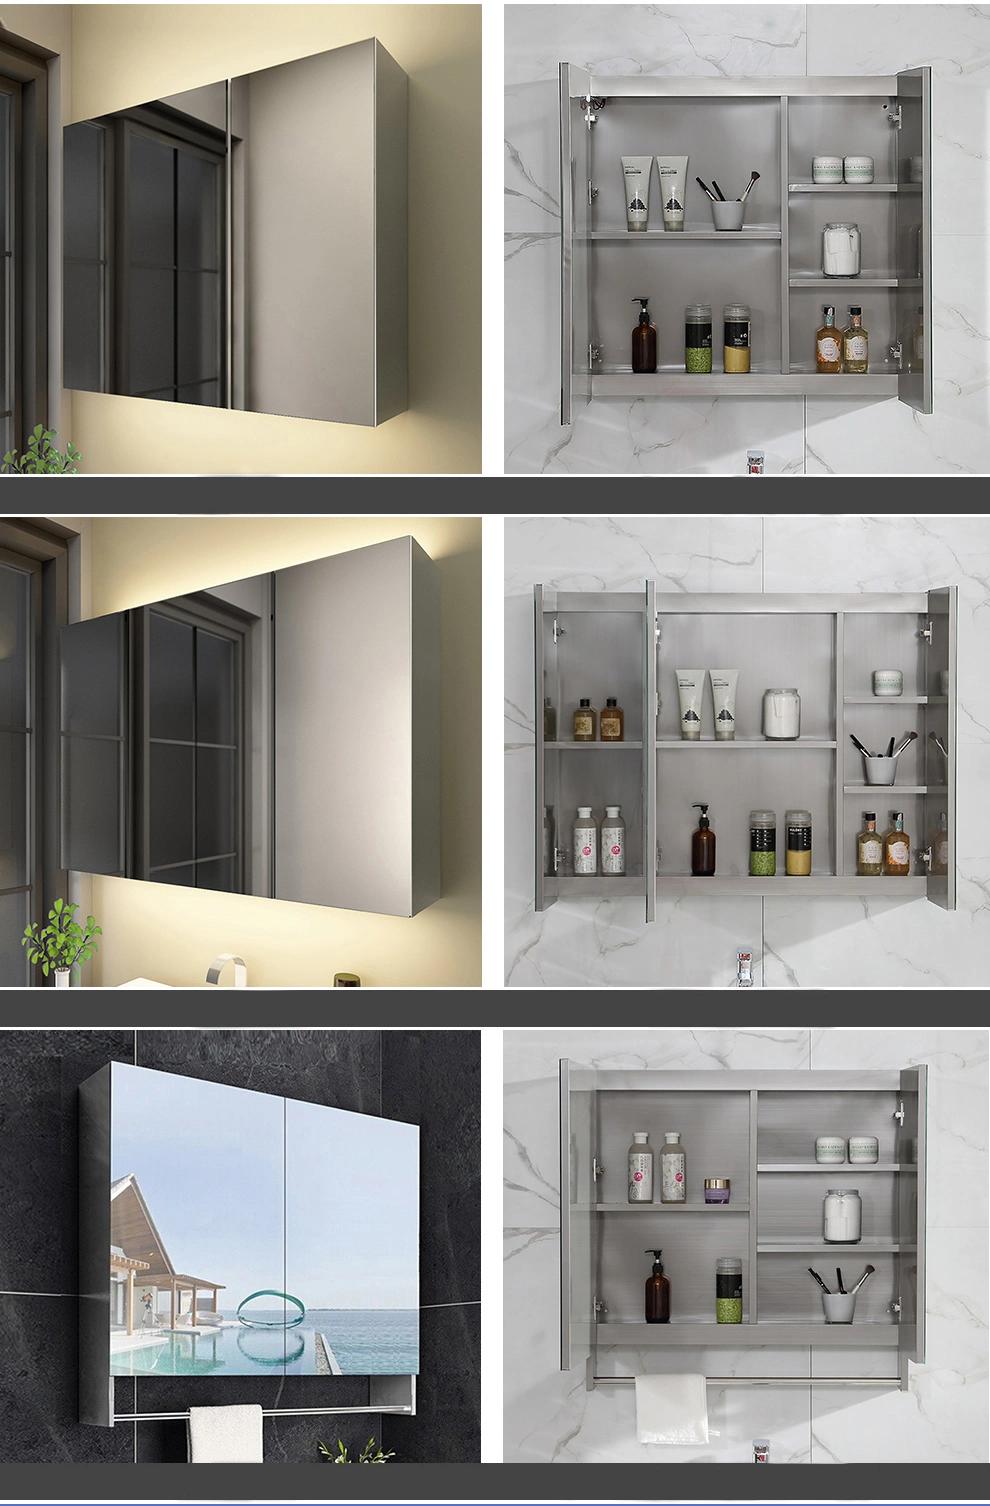 Bathroom & Kitchen Stainless, PVC, MDF Structure Mecidine Mirror Cabinet for Home Decor